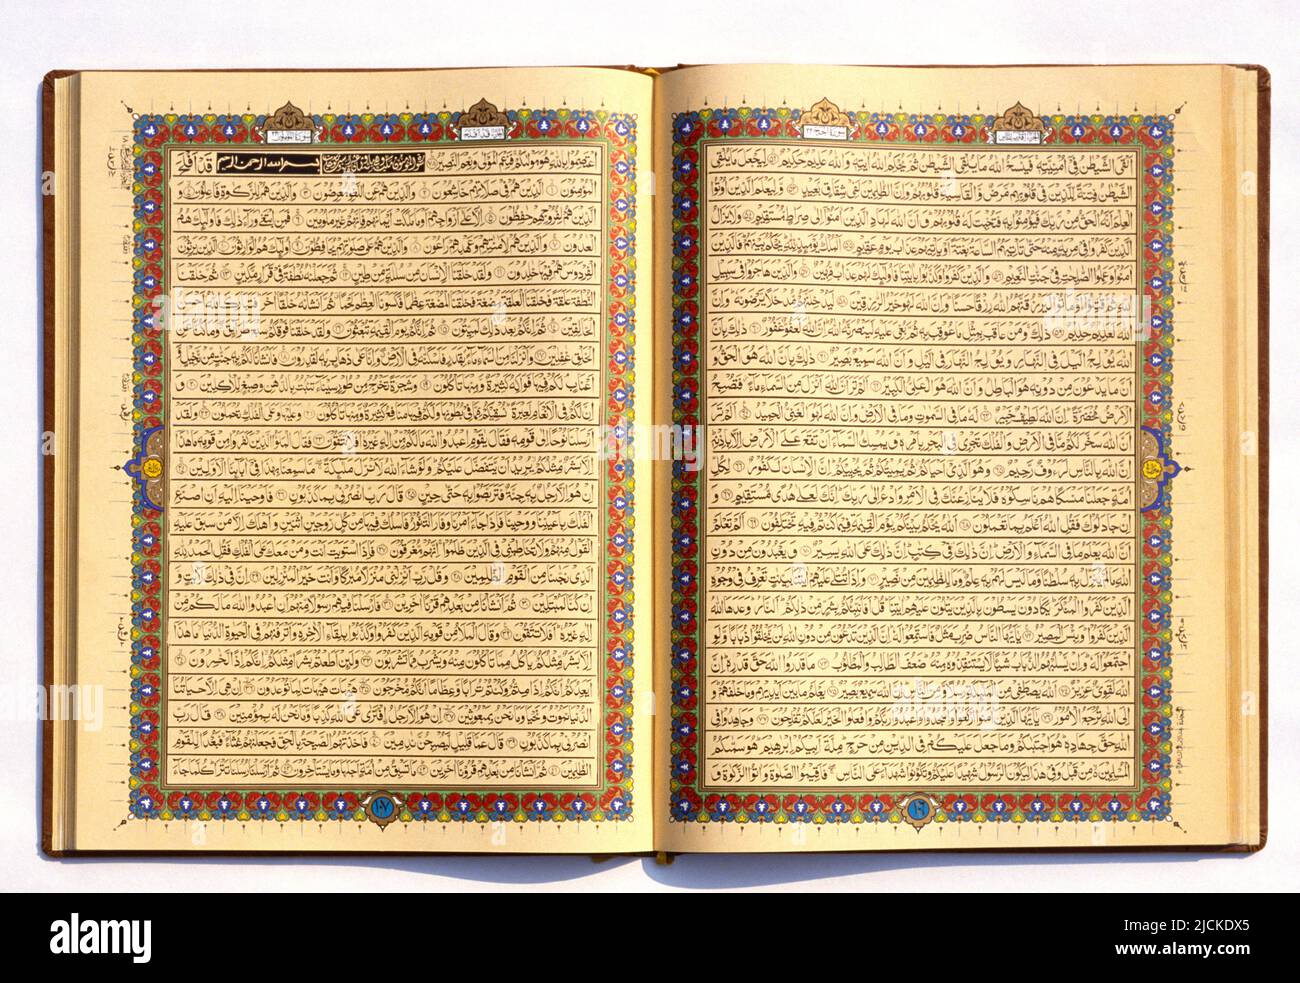 New Quran Showing Arabic Calligraphy Stock Photo